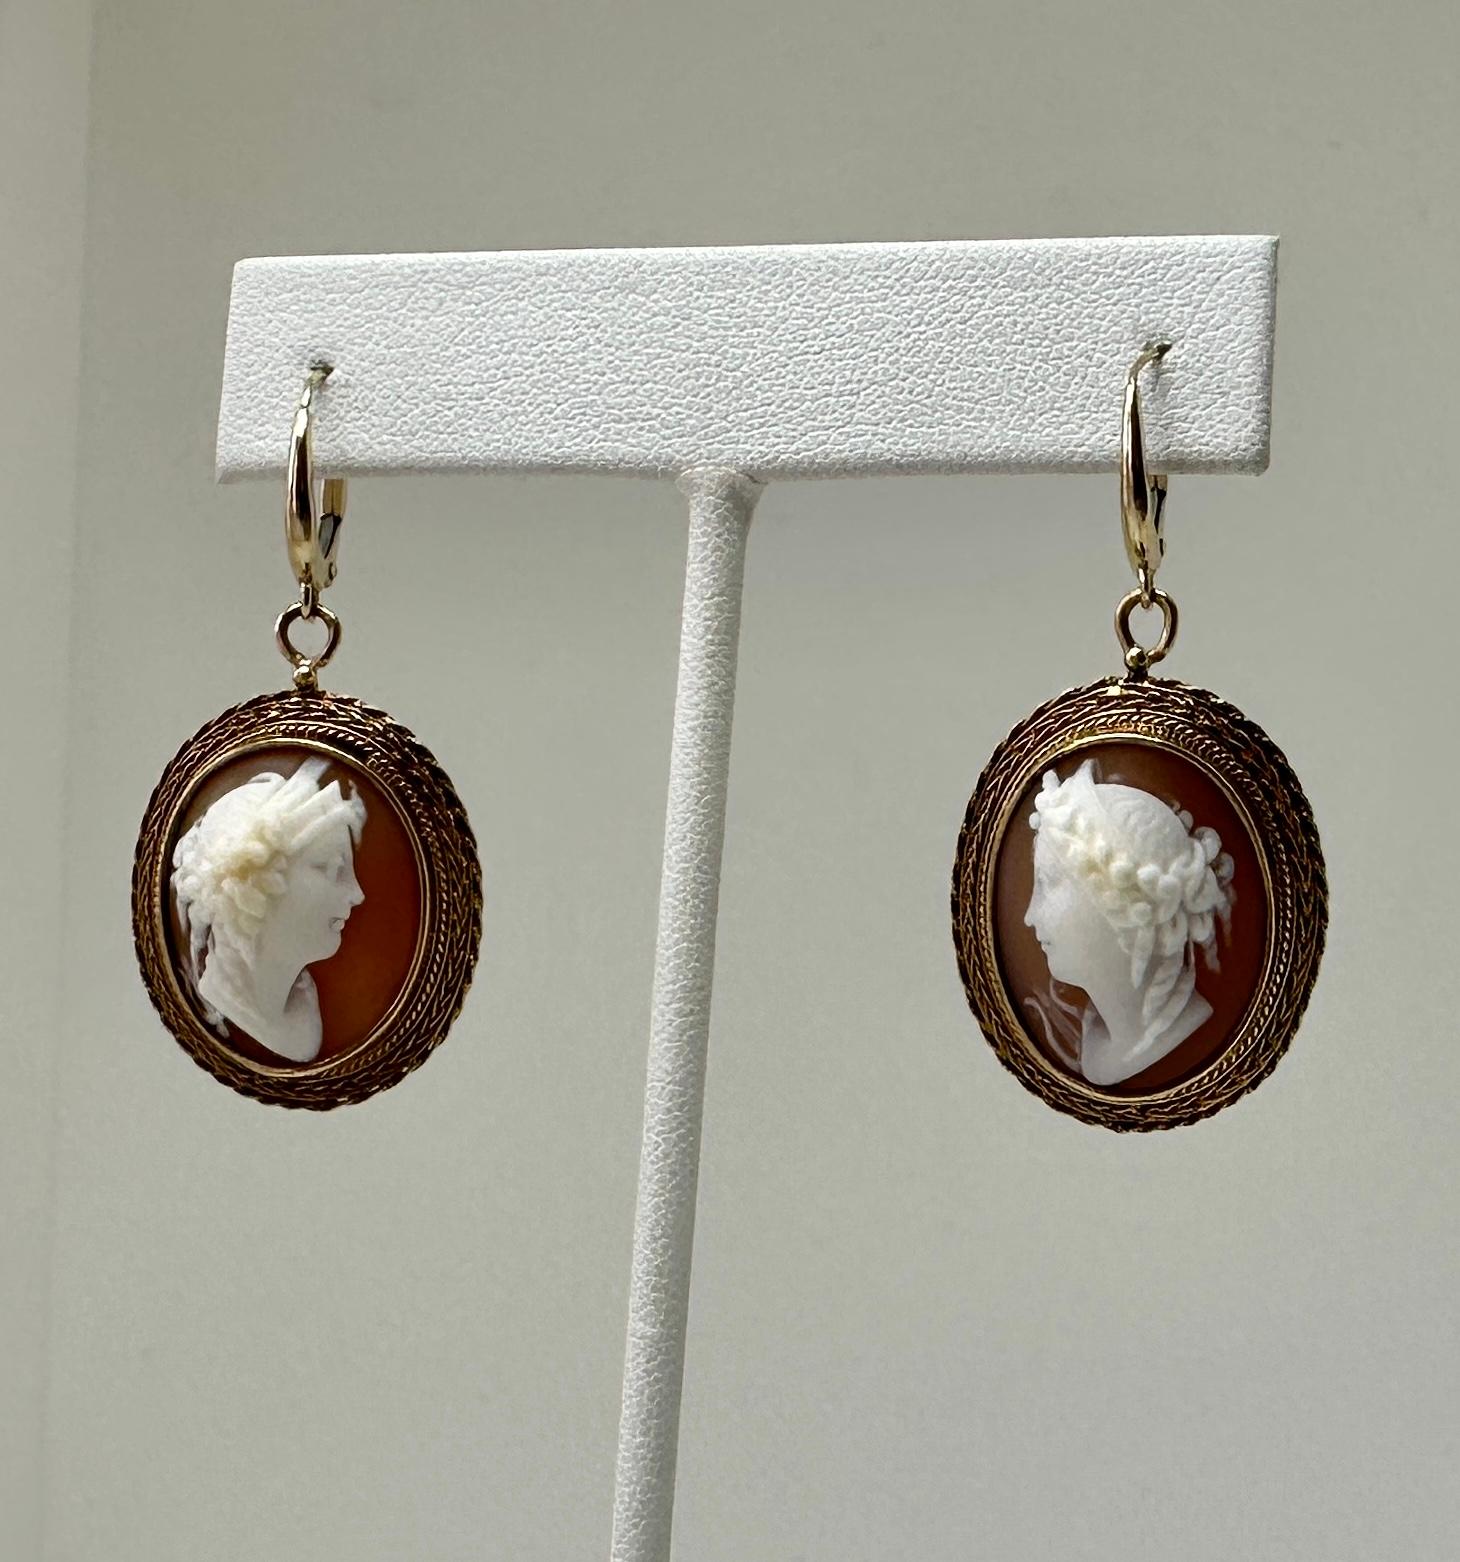 Victorian Goddess Woman Cameo Earrings Dangle Drop Earrings Gold, circa 1870 In Excellent Condition For Sale In New York, NY